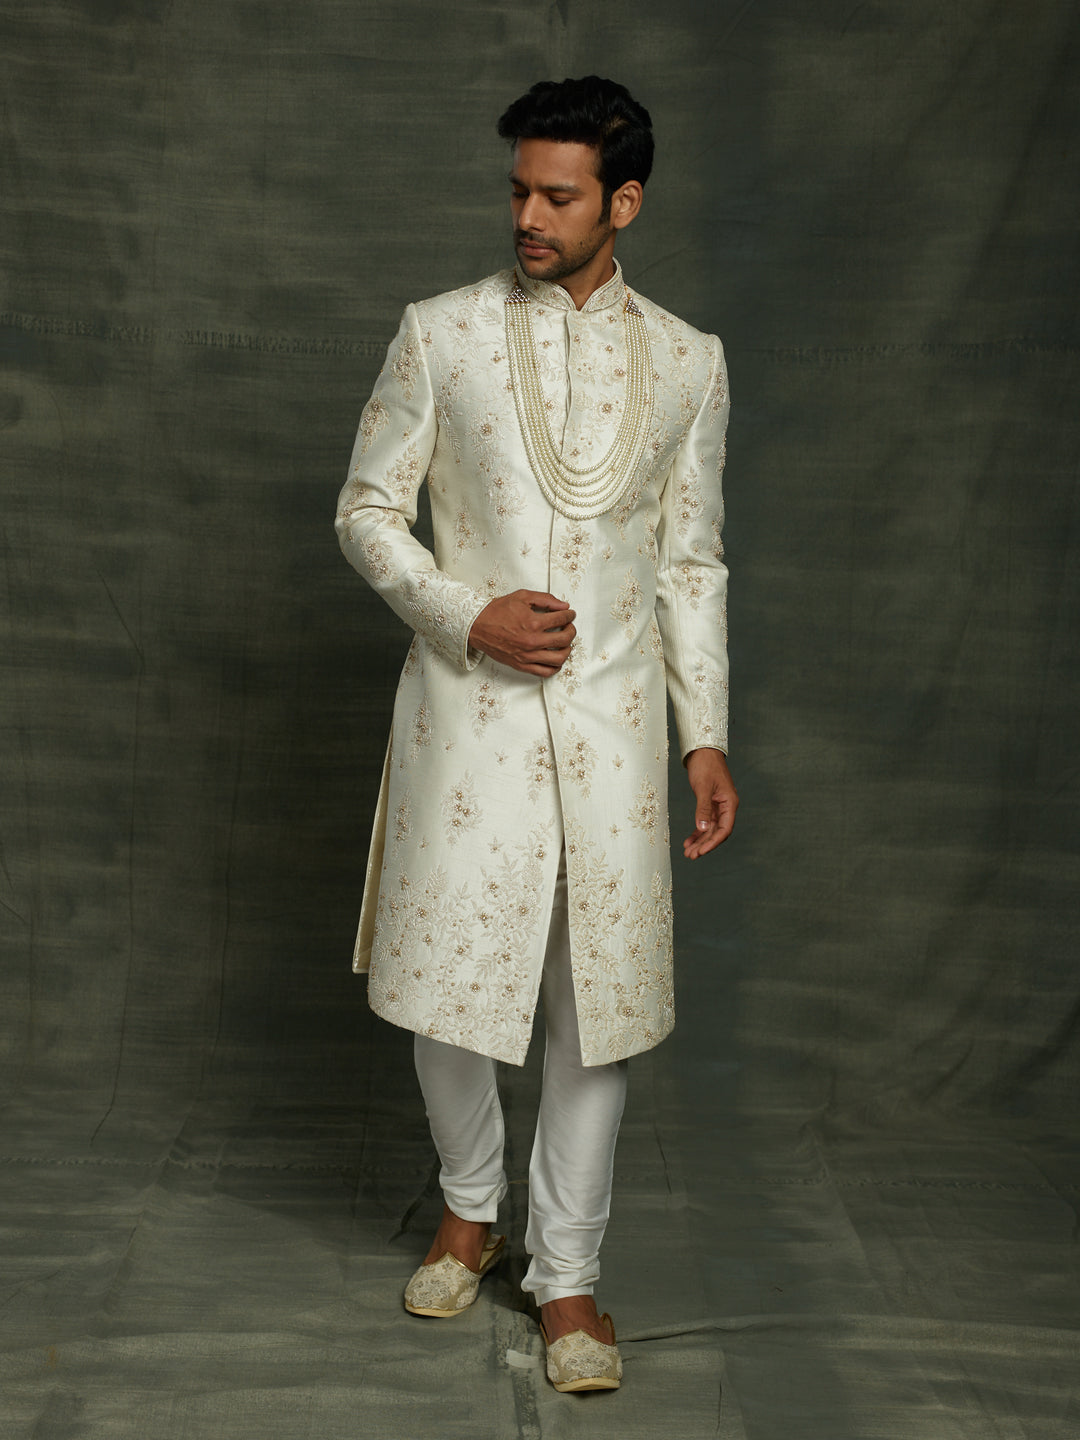 Off-white silk sherwani with floral work placement.